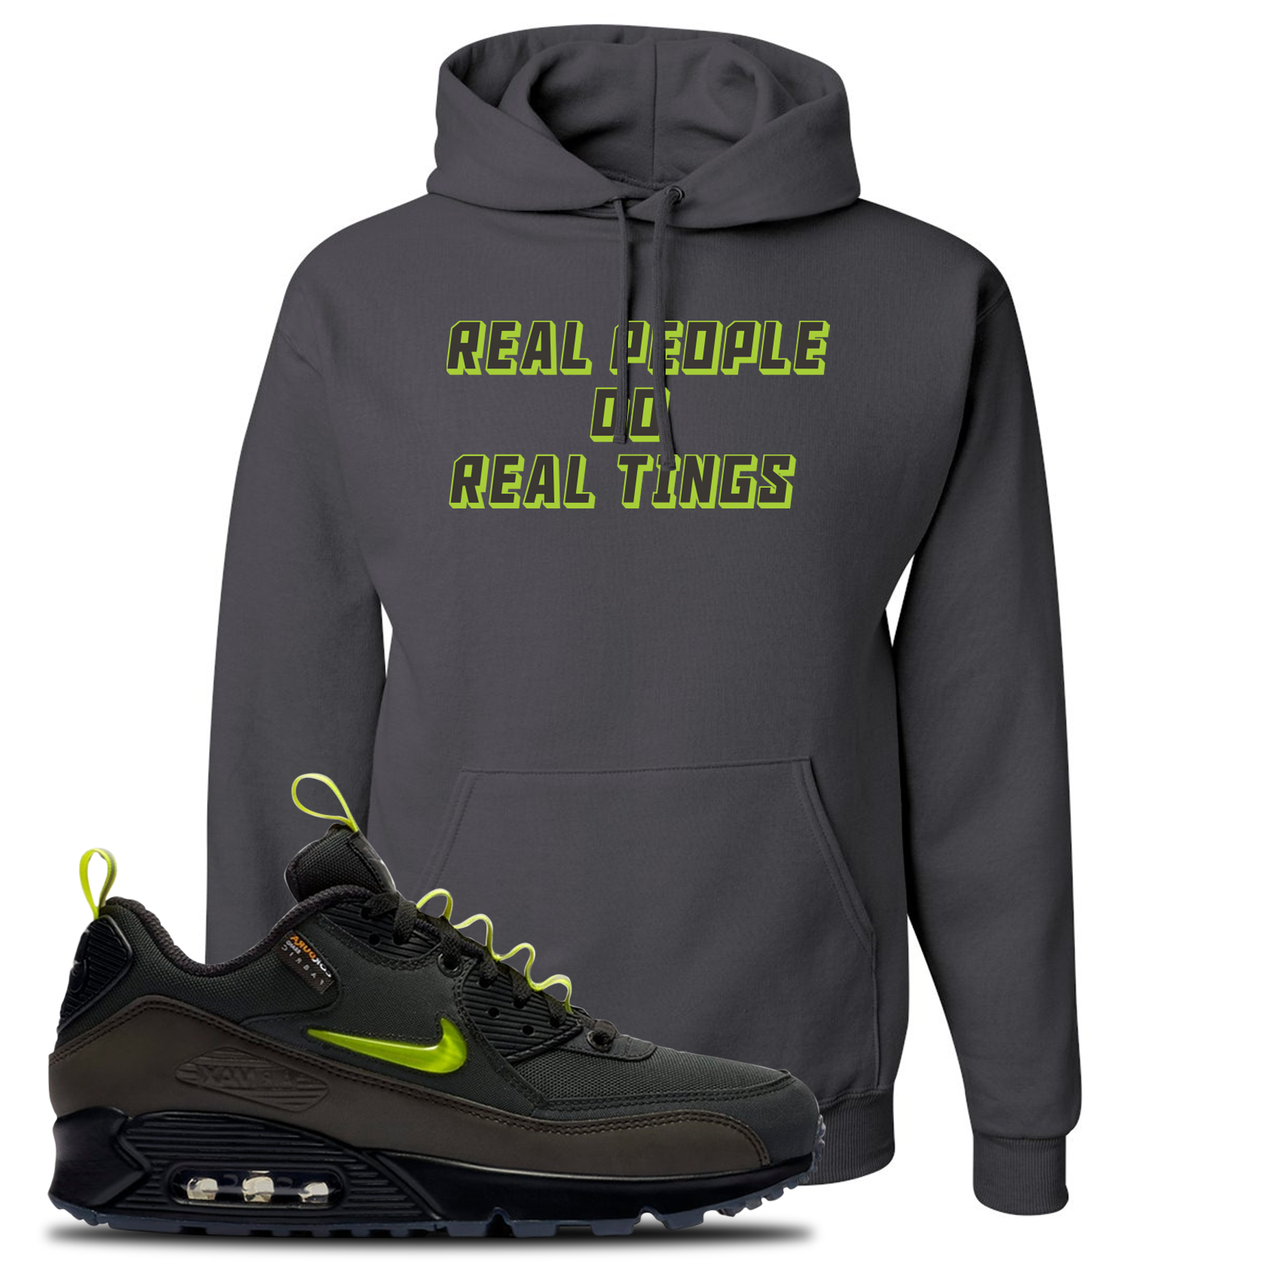 The Basement X Air Max 90 Manchester Real People Do Real Things Charcoal Gray Sneaker Hook Up Pullover Hoodie